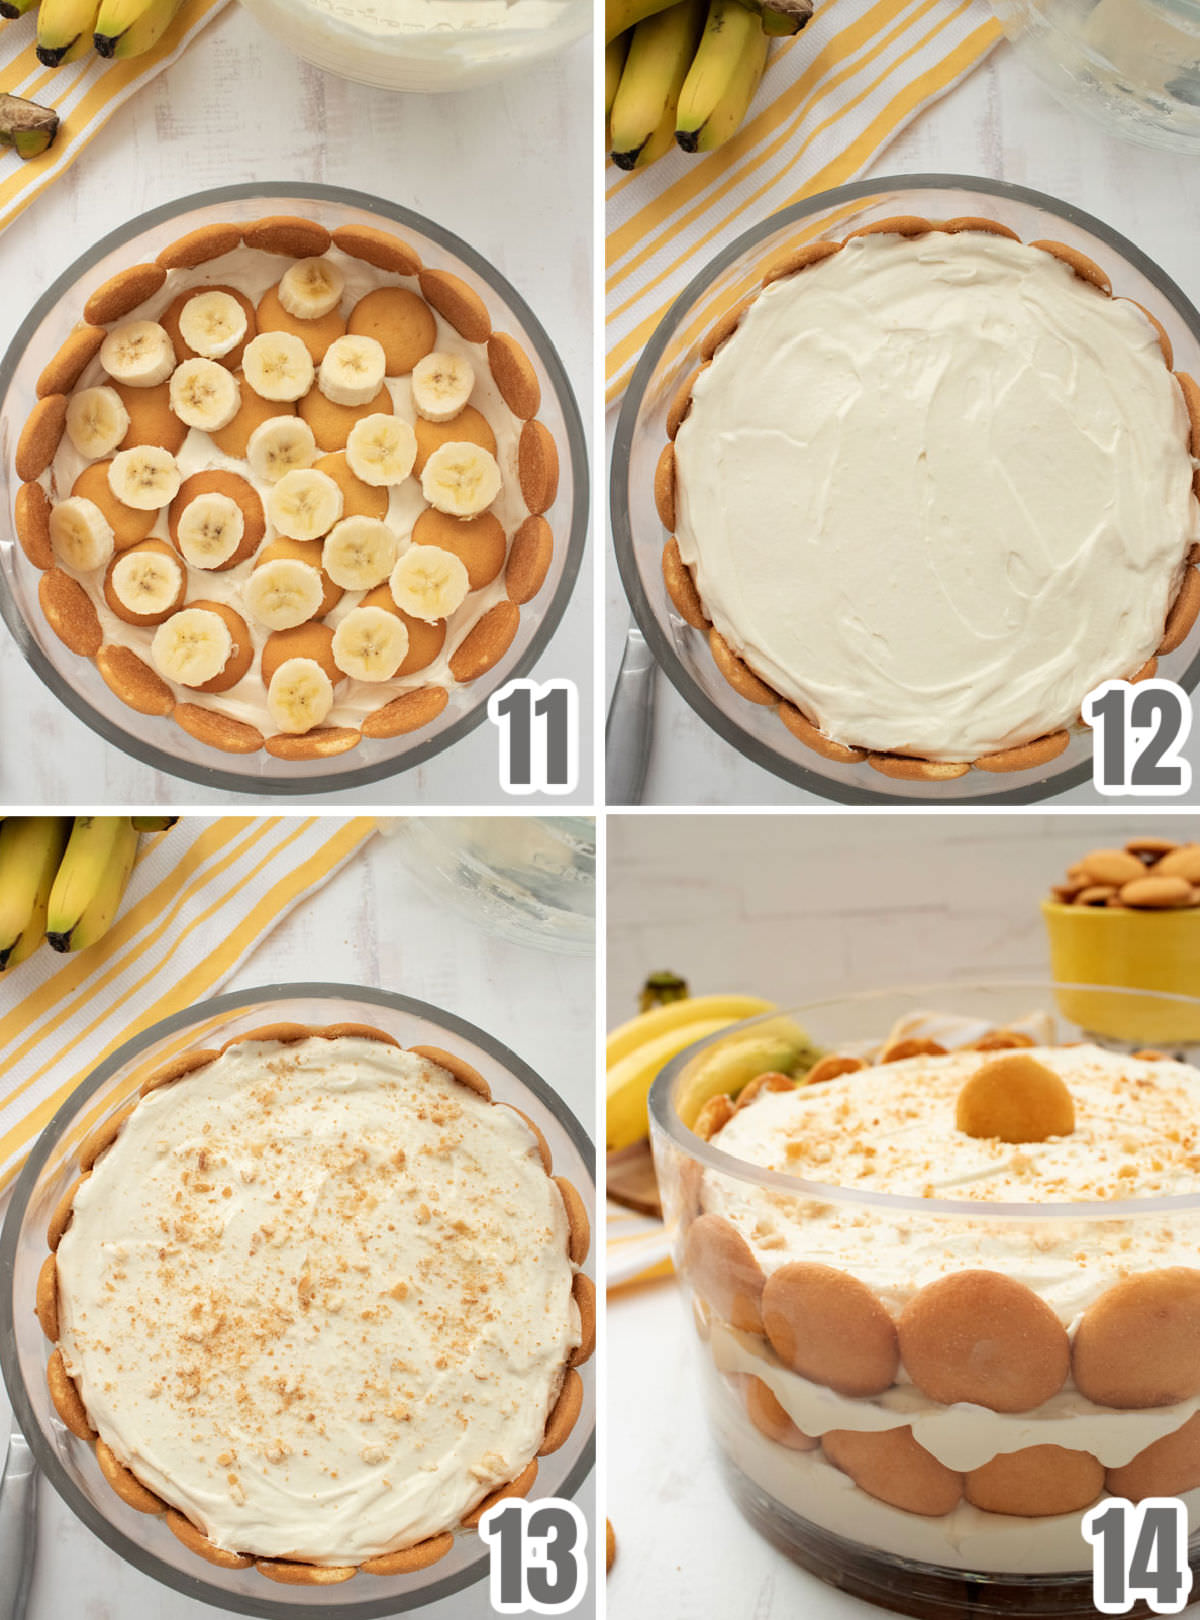 A collage image showing the steps for layering the Pudding ingredients into the bowl.